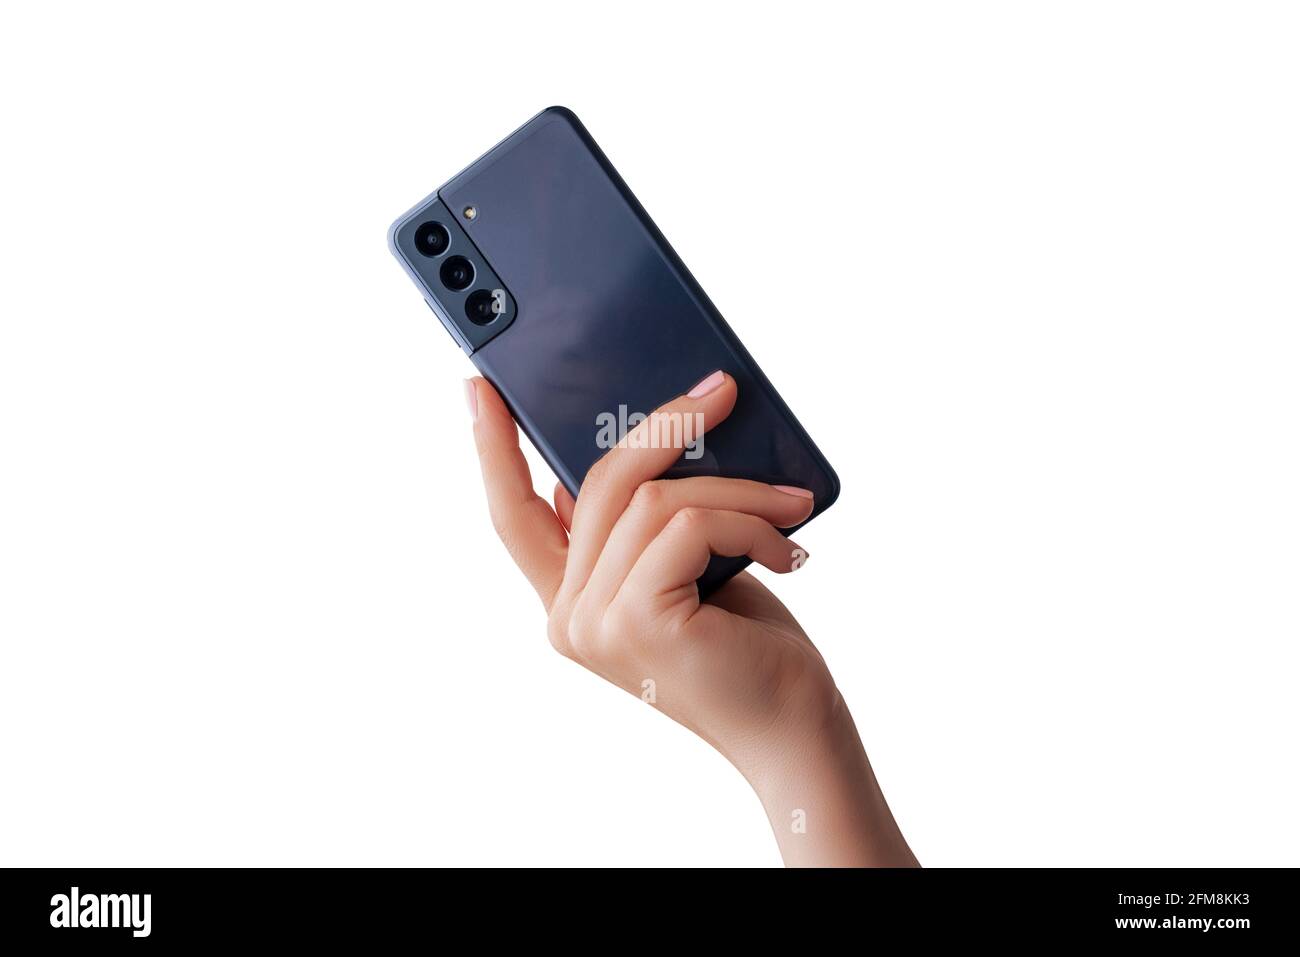 Woman hand shows a modern phone with three cameras on the back. Isolated background Stock Photo